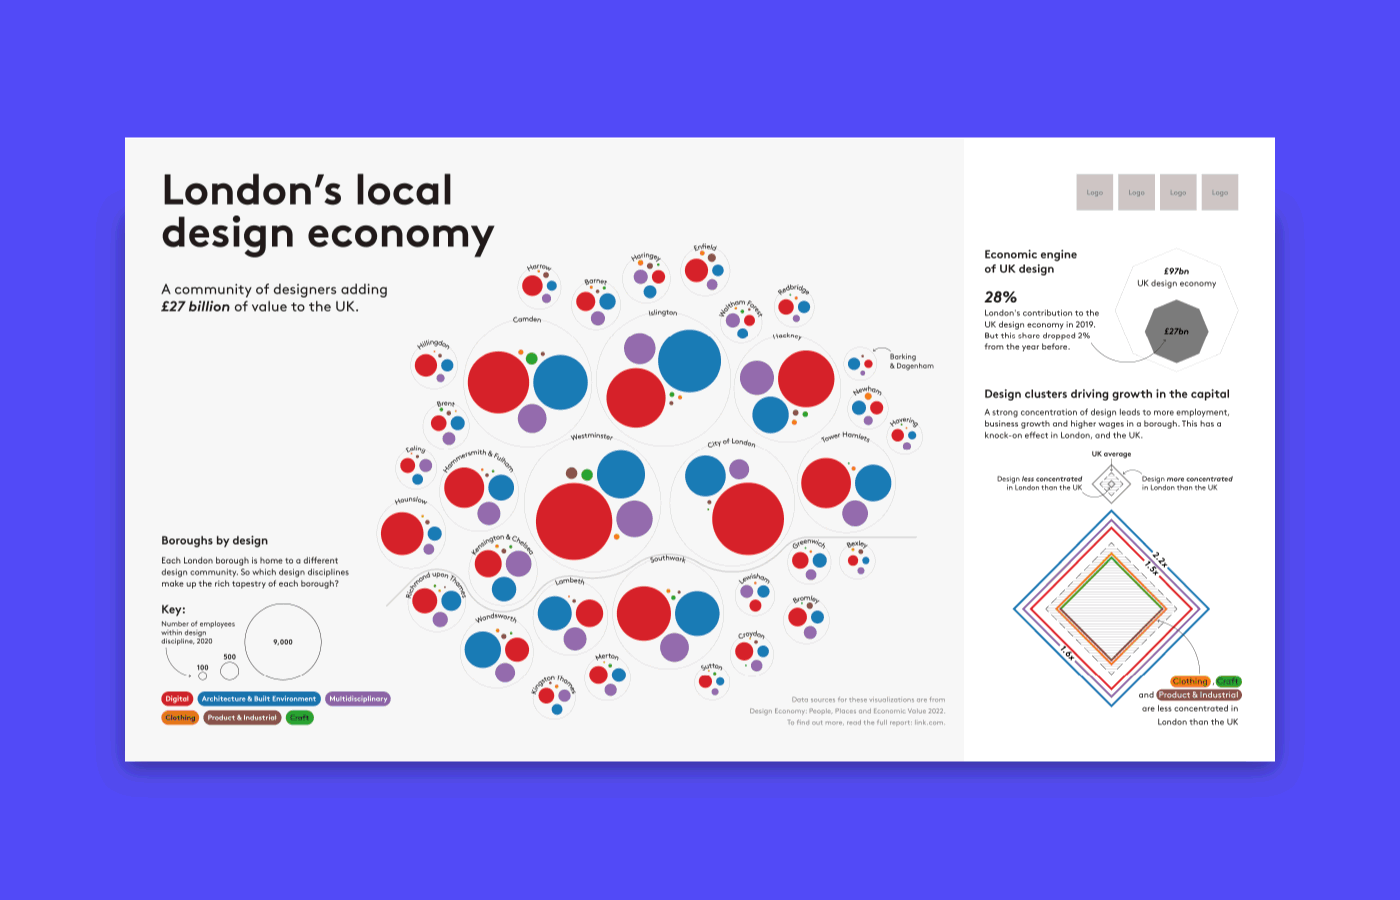 An animated image showing six iterations of the Mapping London’s Design Economy poster. Each version visualizes designers and design disciplines in each London borough.